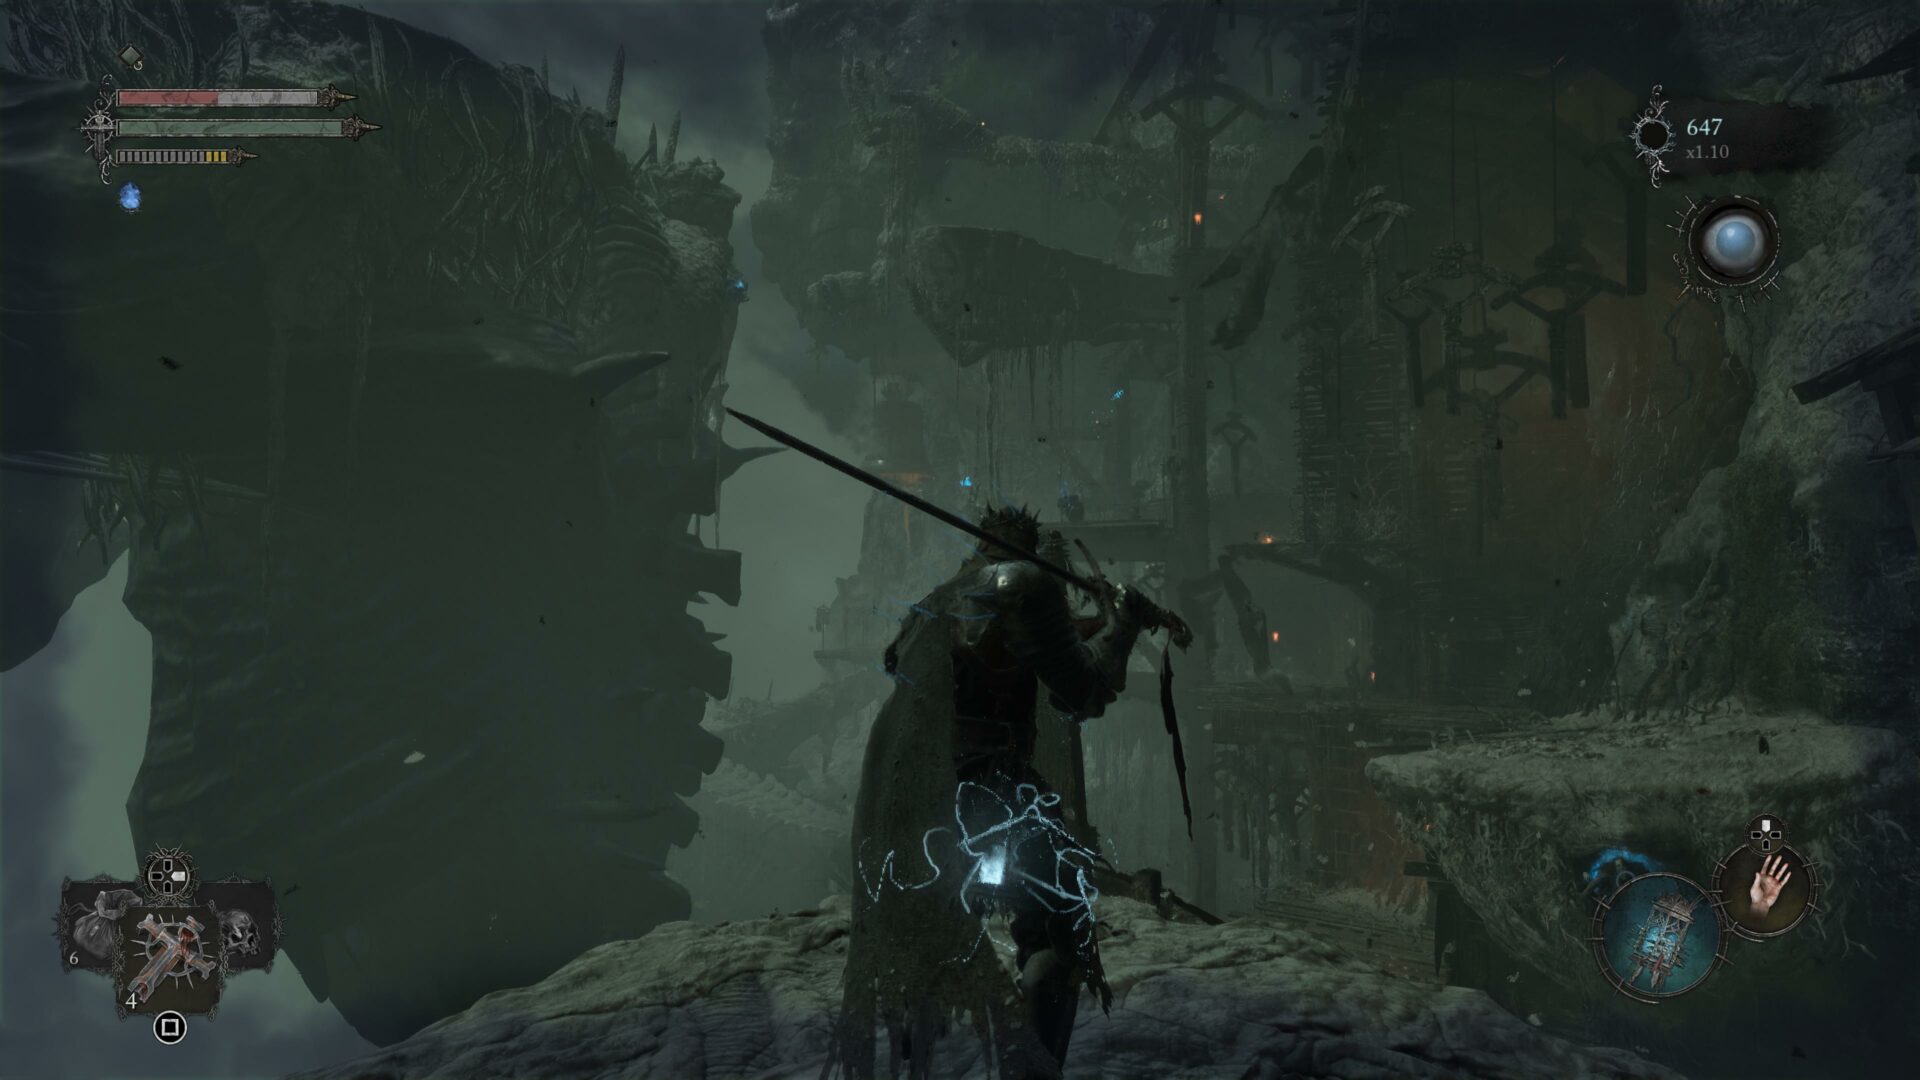 This new Lords of the Fallen PS4 gameplay looks a lot like Dark Souls